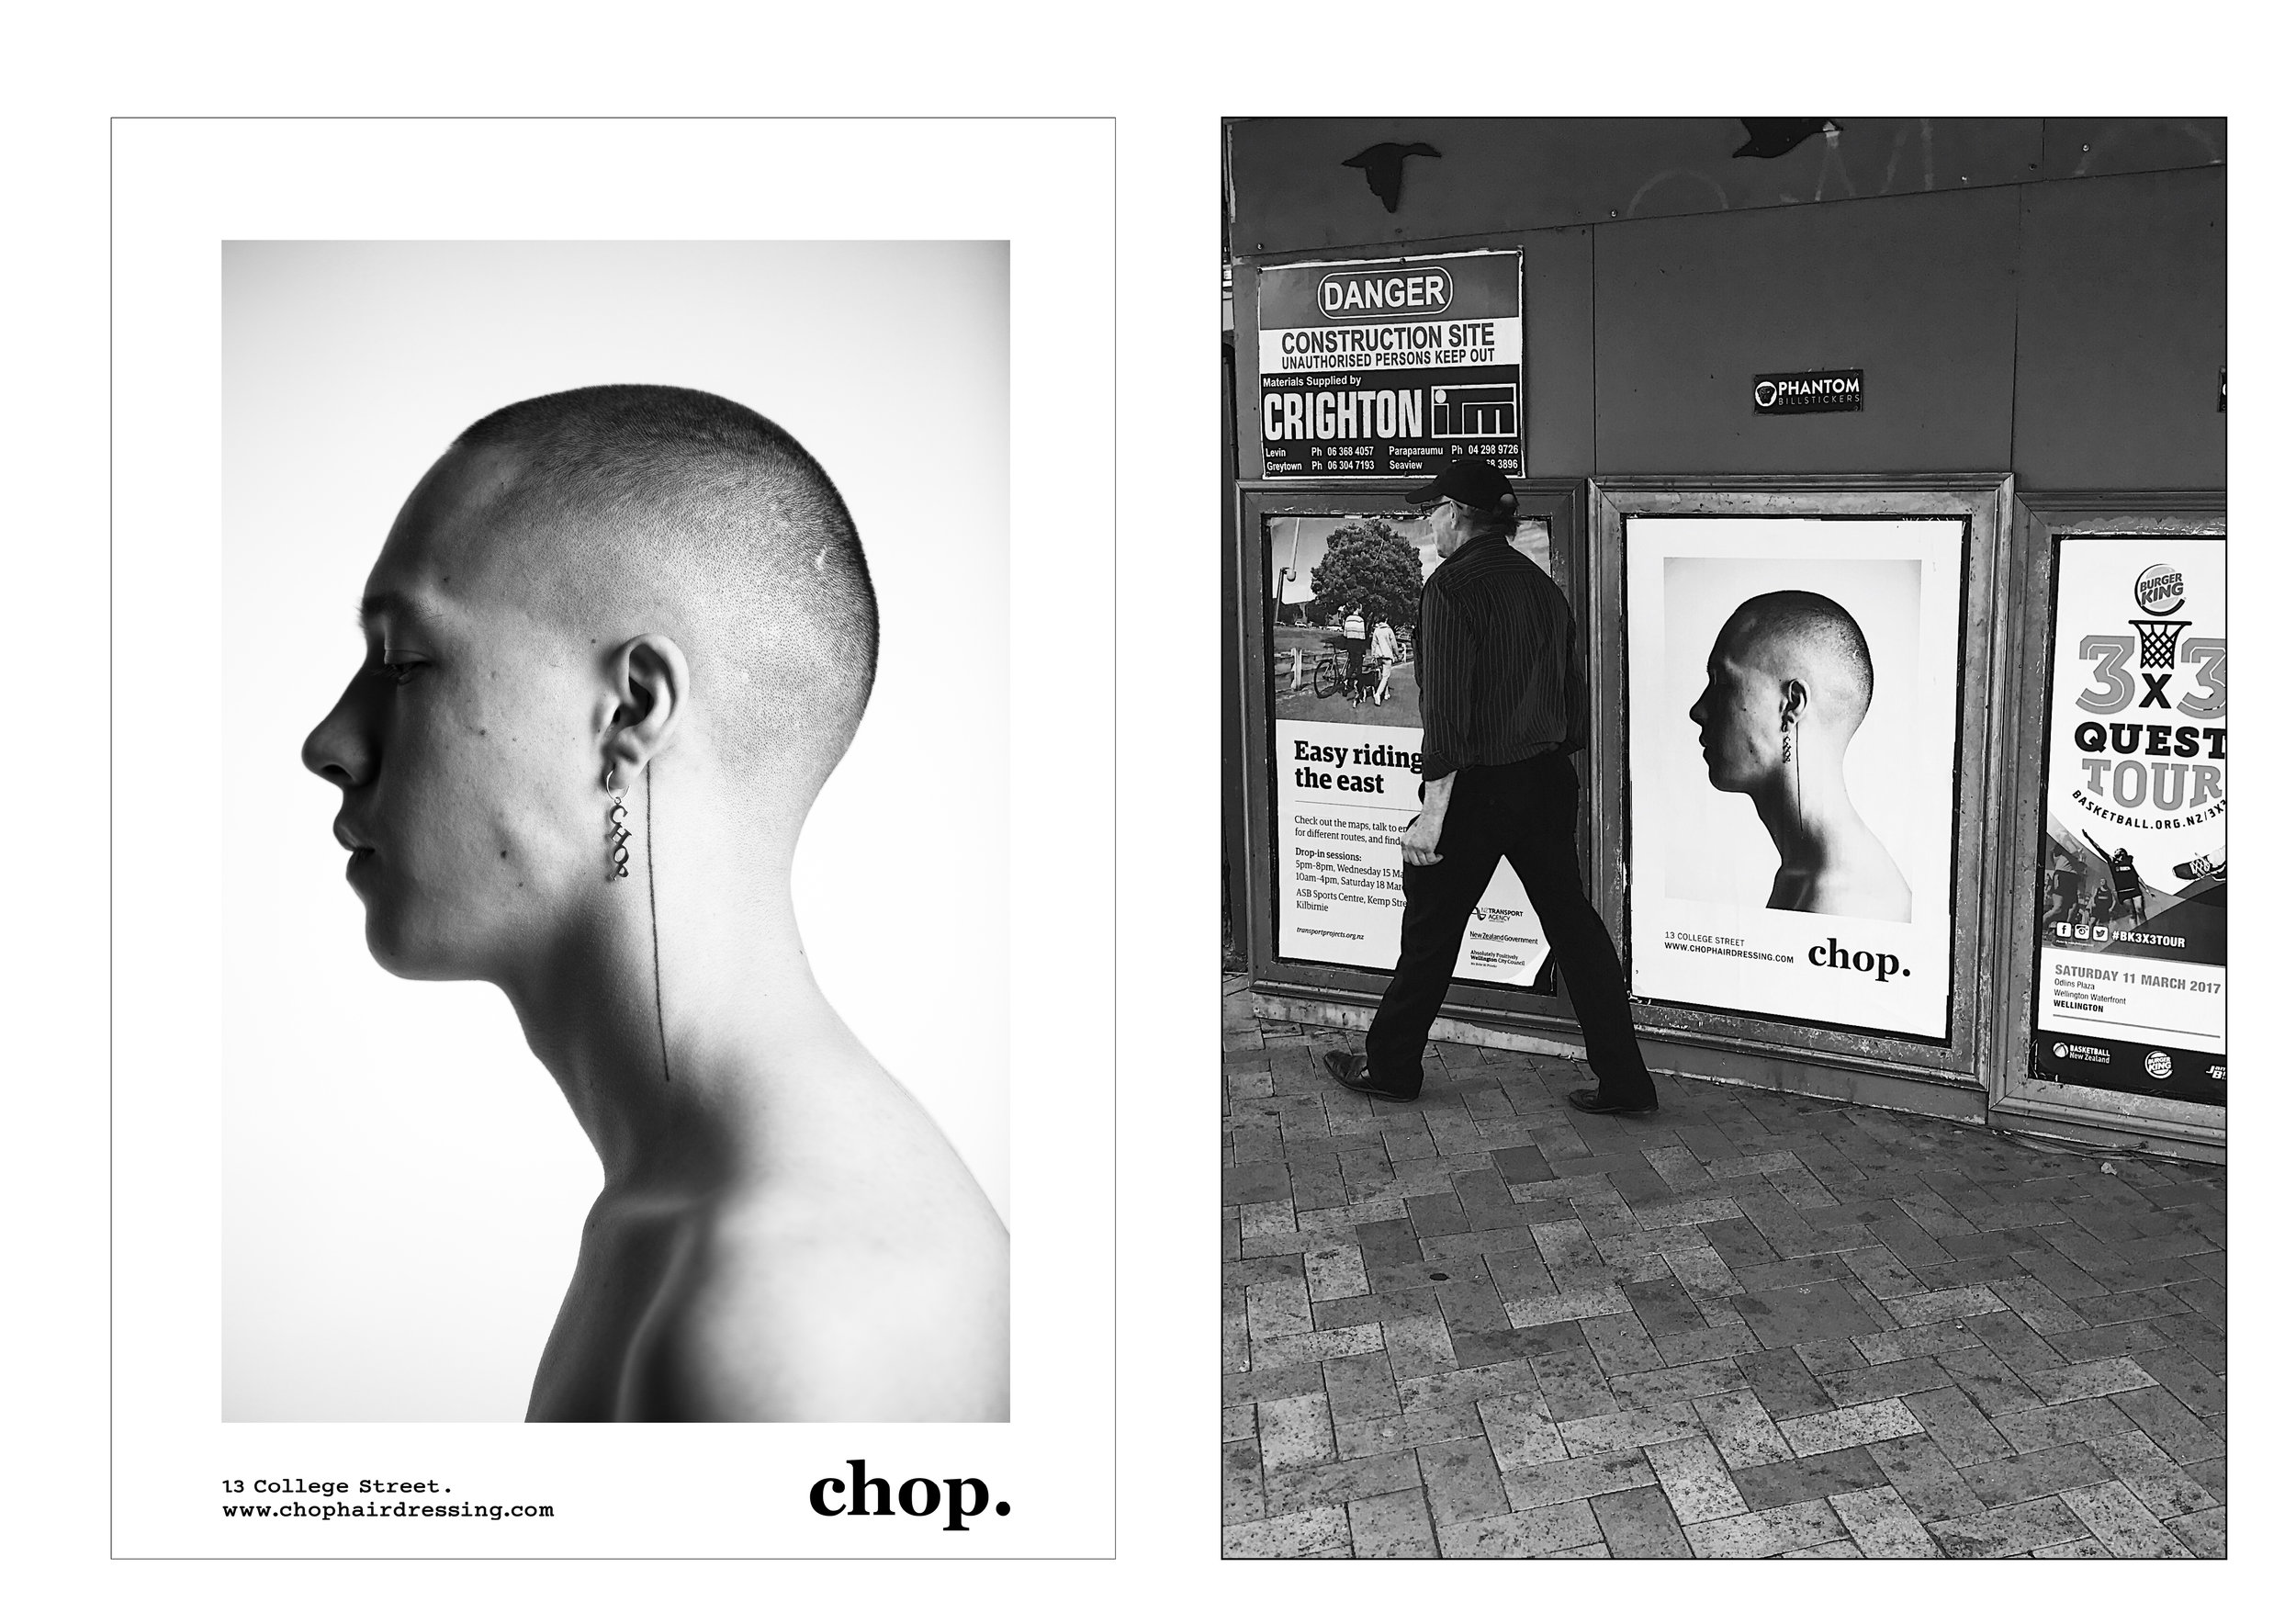  Street poster lay-ups for Chop 16 campaign 